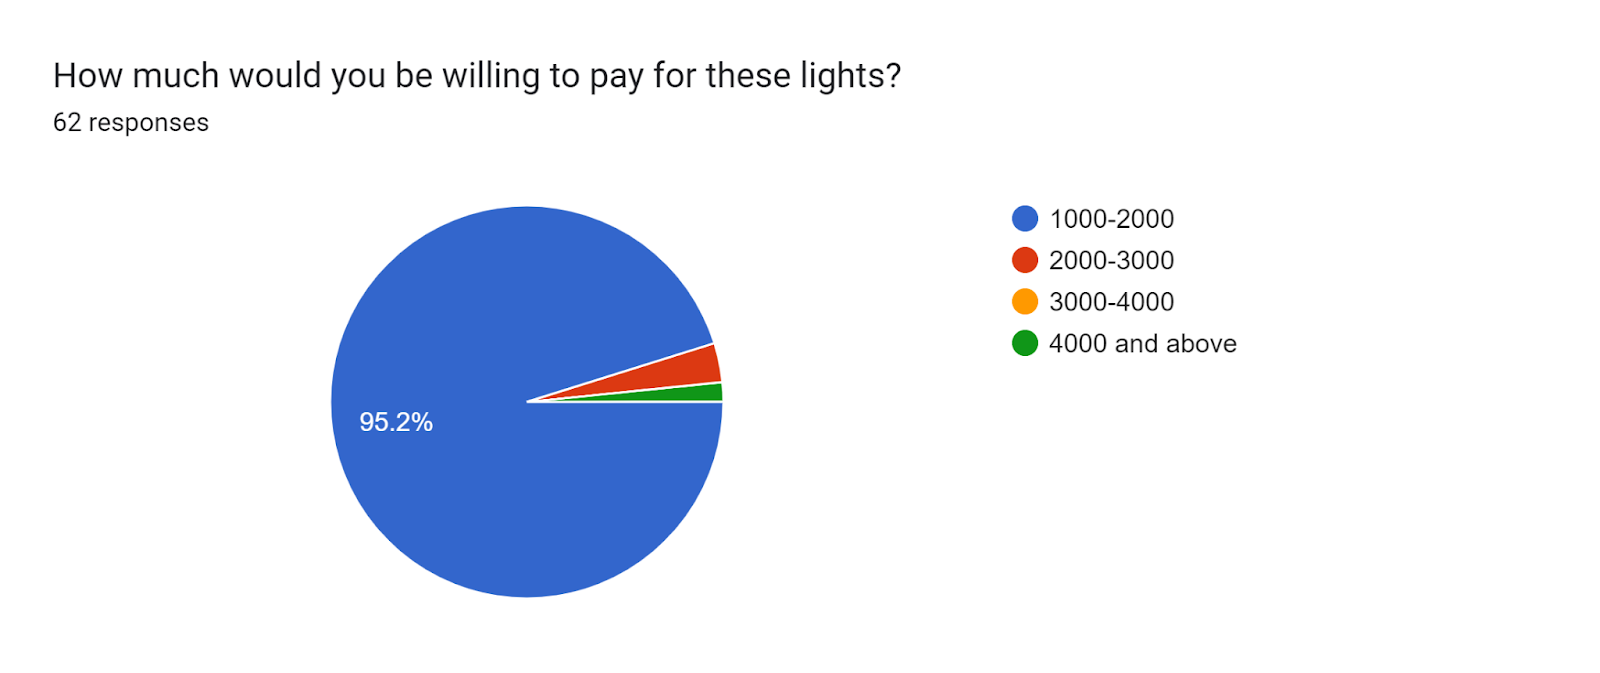 Forms response chart. Question title: How much would you be willing to pay for these lights?. Number of responses: 62 responses.